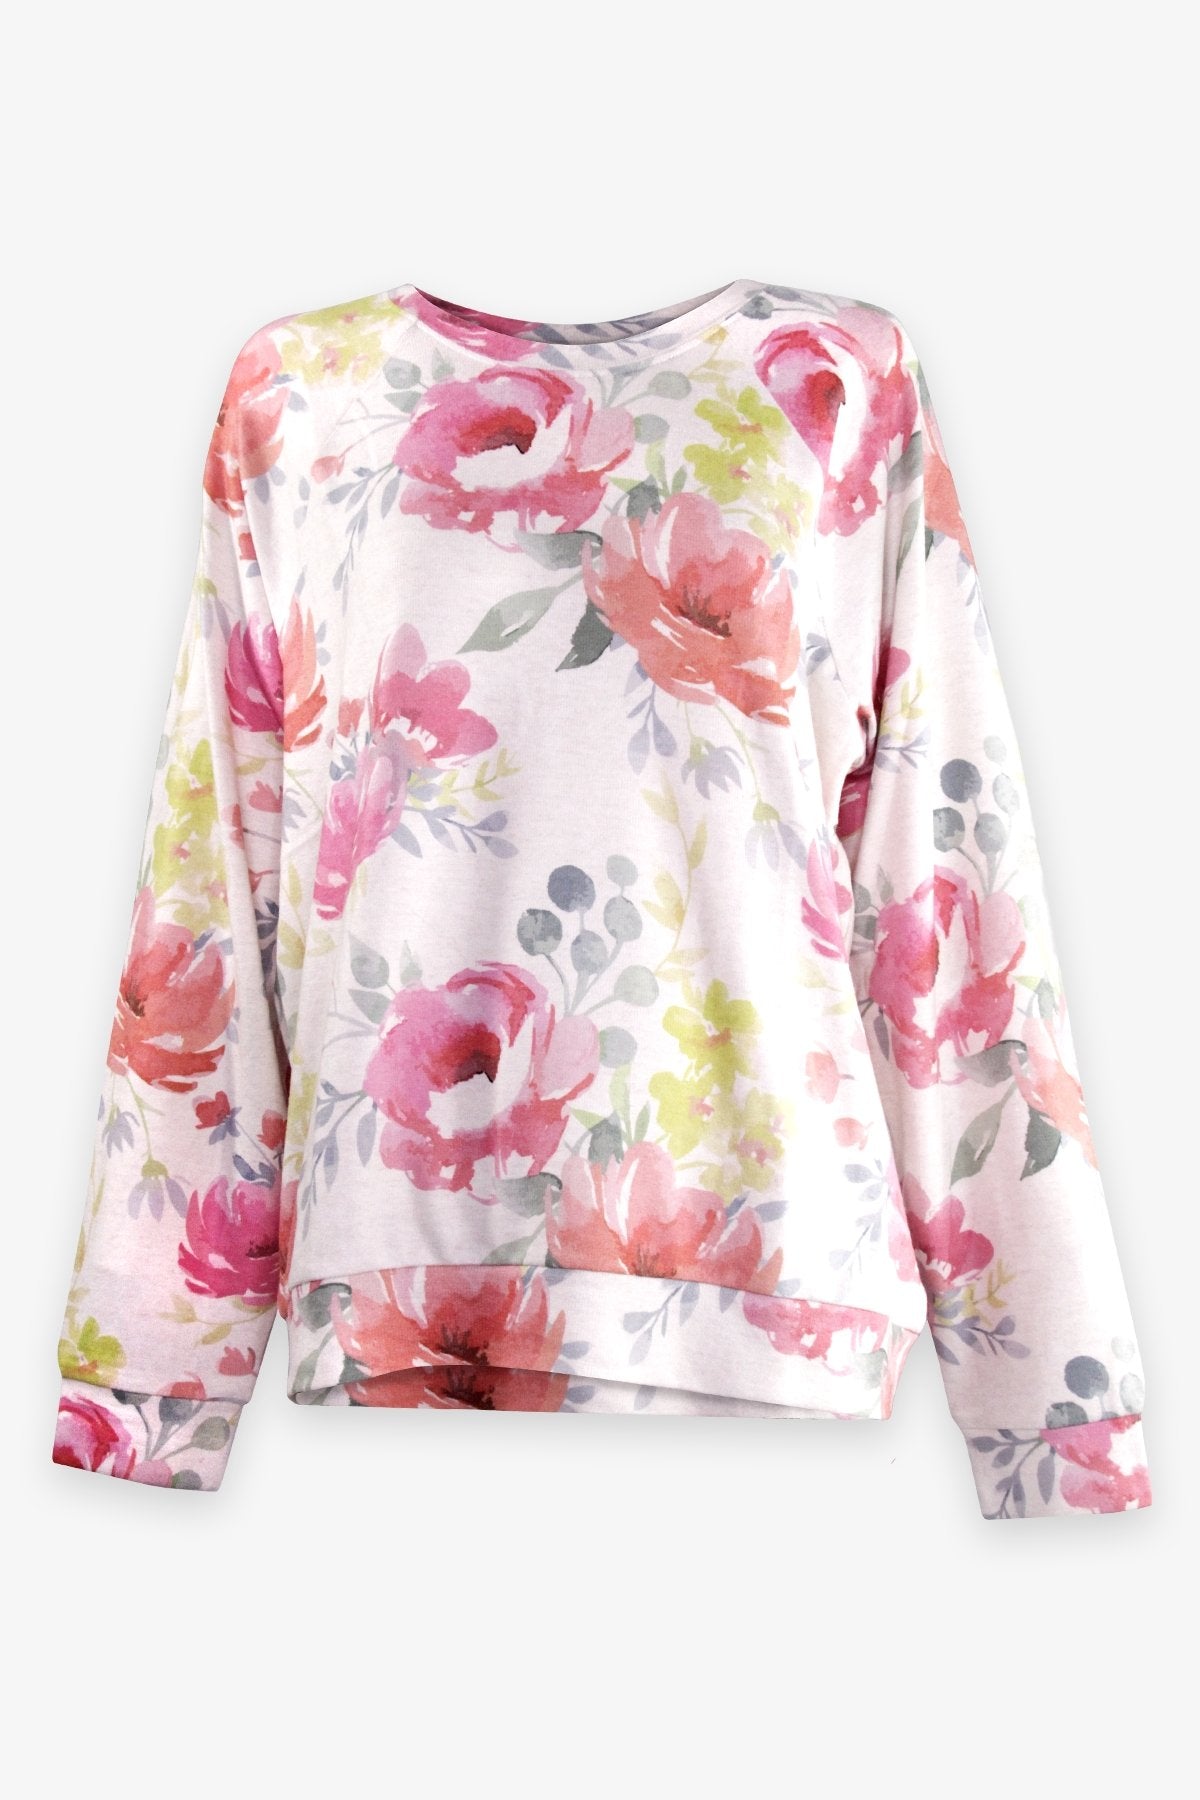 Happy Blooms Long Sleeve Top in Oatmeal - shop-olivia.com